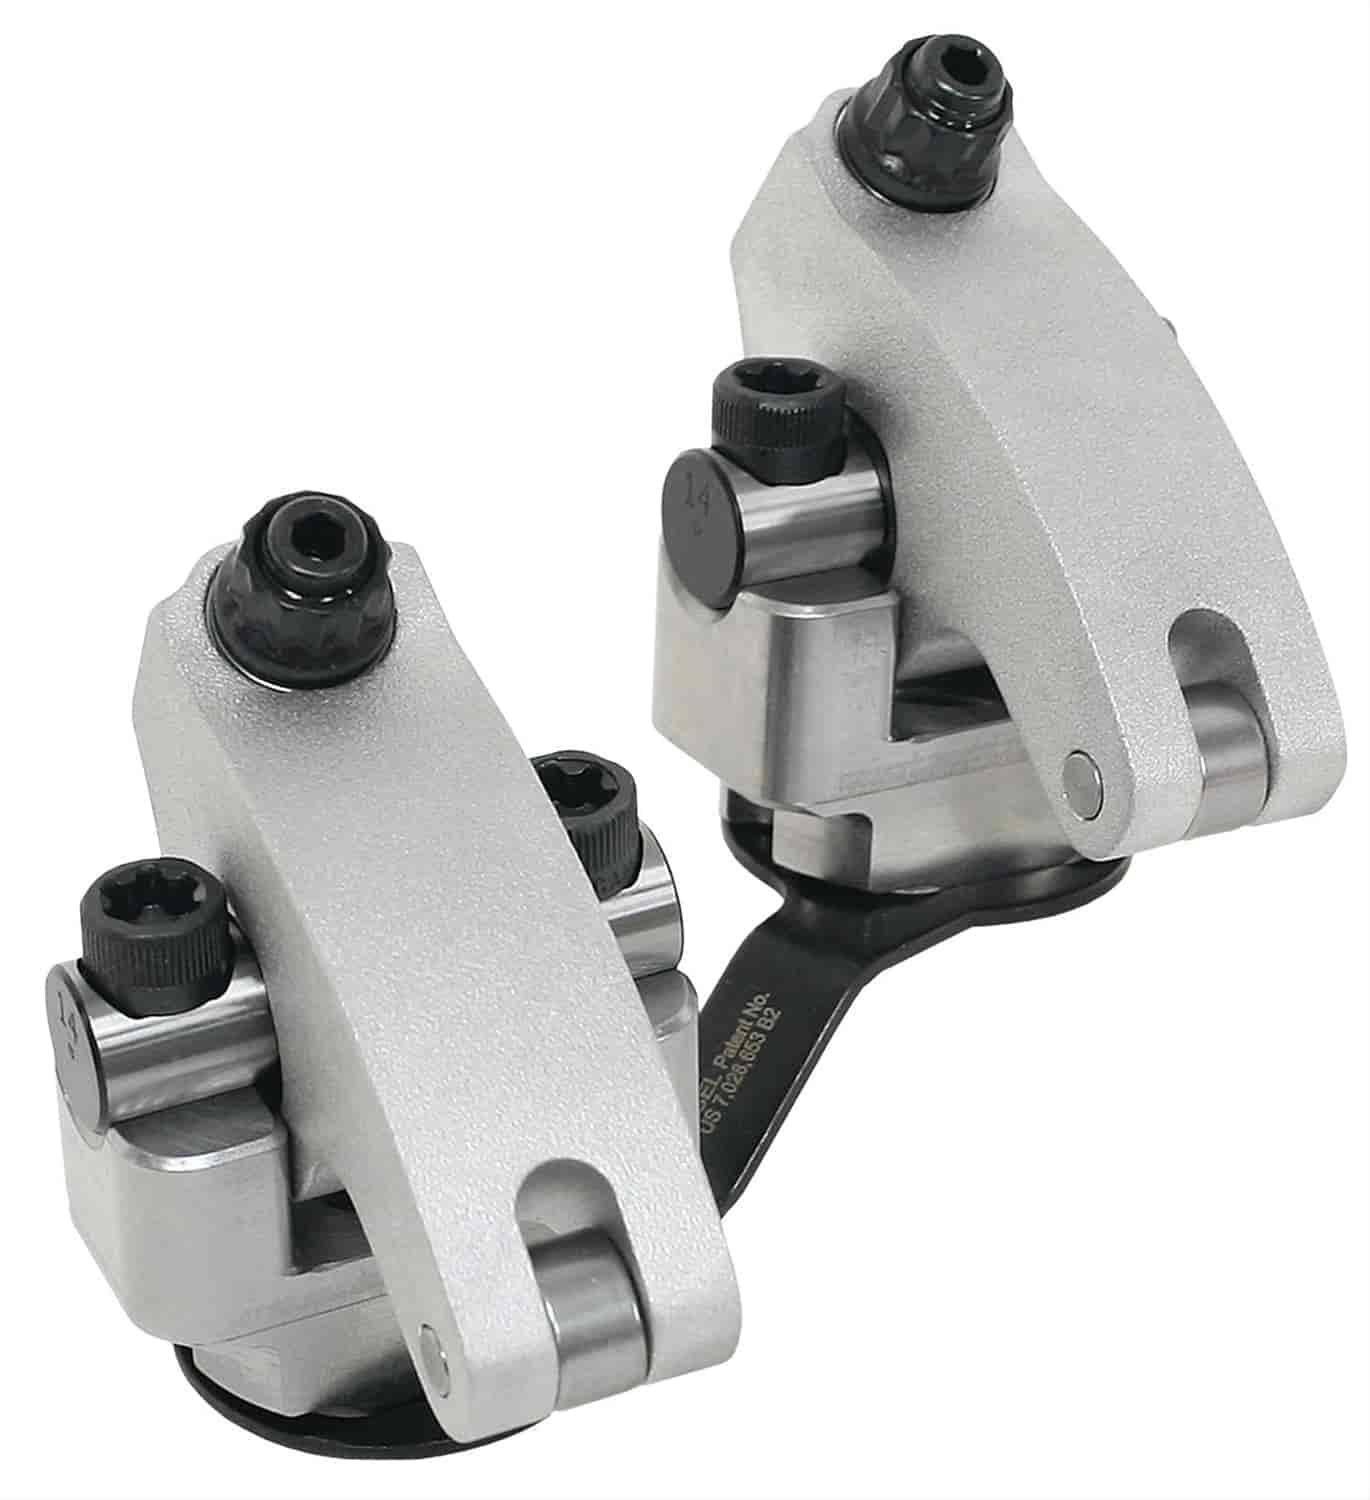 Series SS Shaft Mount Rockers Fits: Canfield 24.5-800 Series World Products Merlin/Aluminum Rocker Ratio: 1.75 IN / 1.75 EX